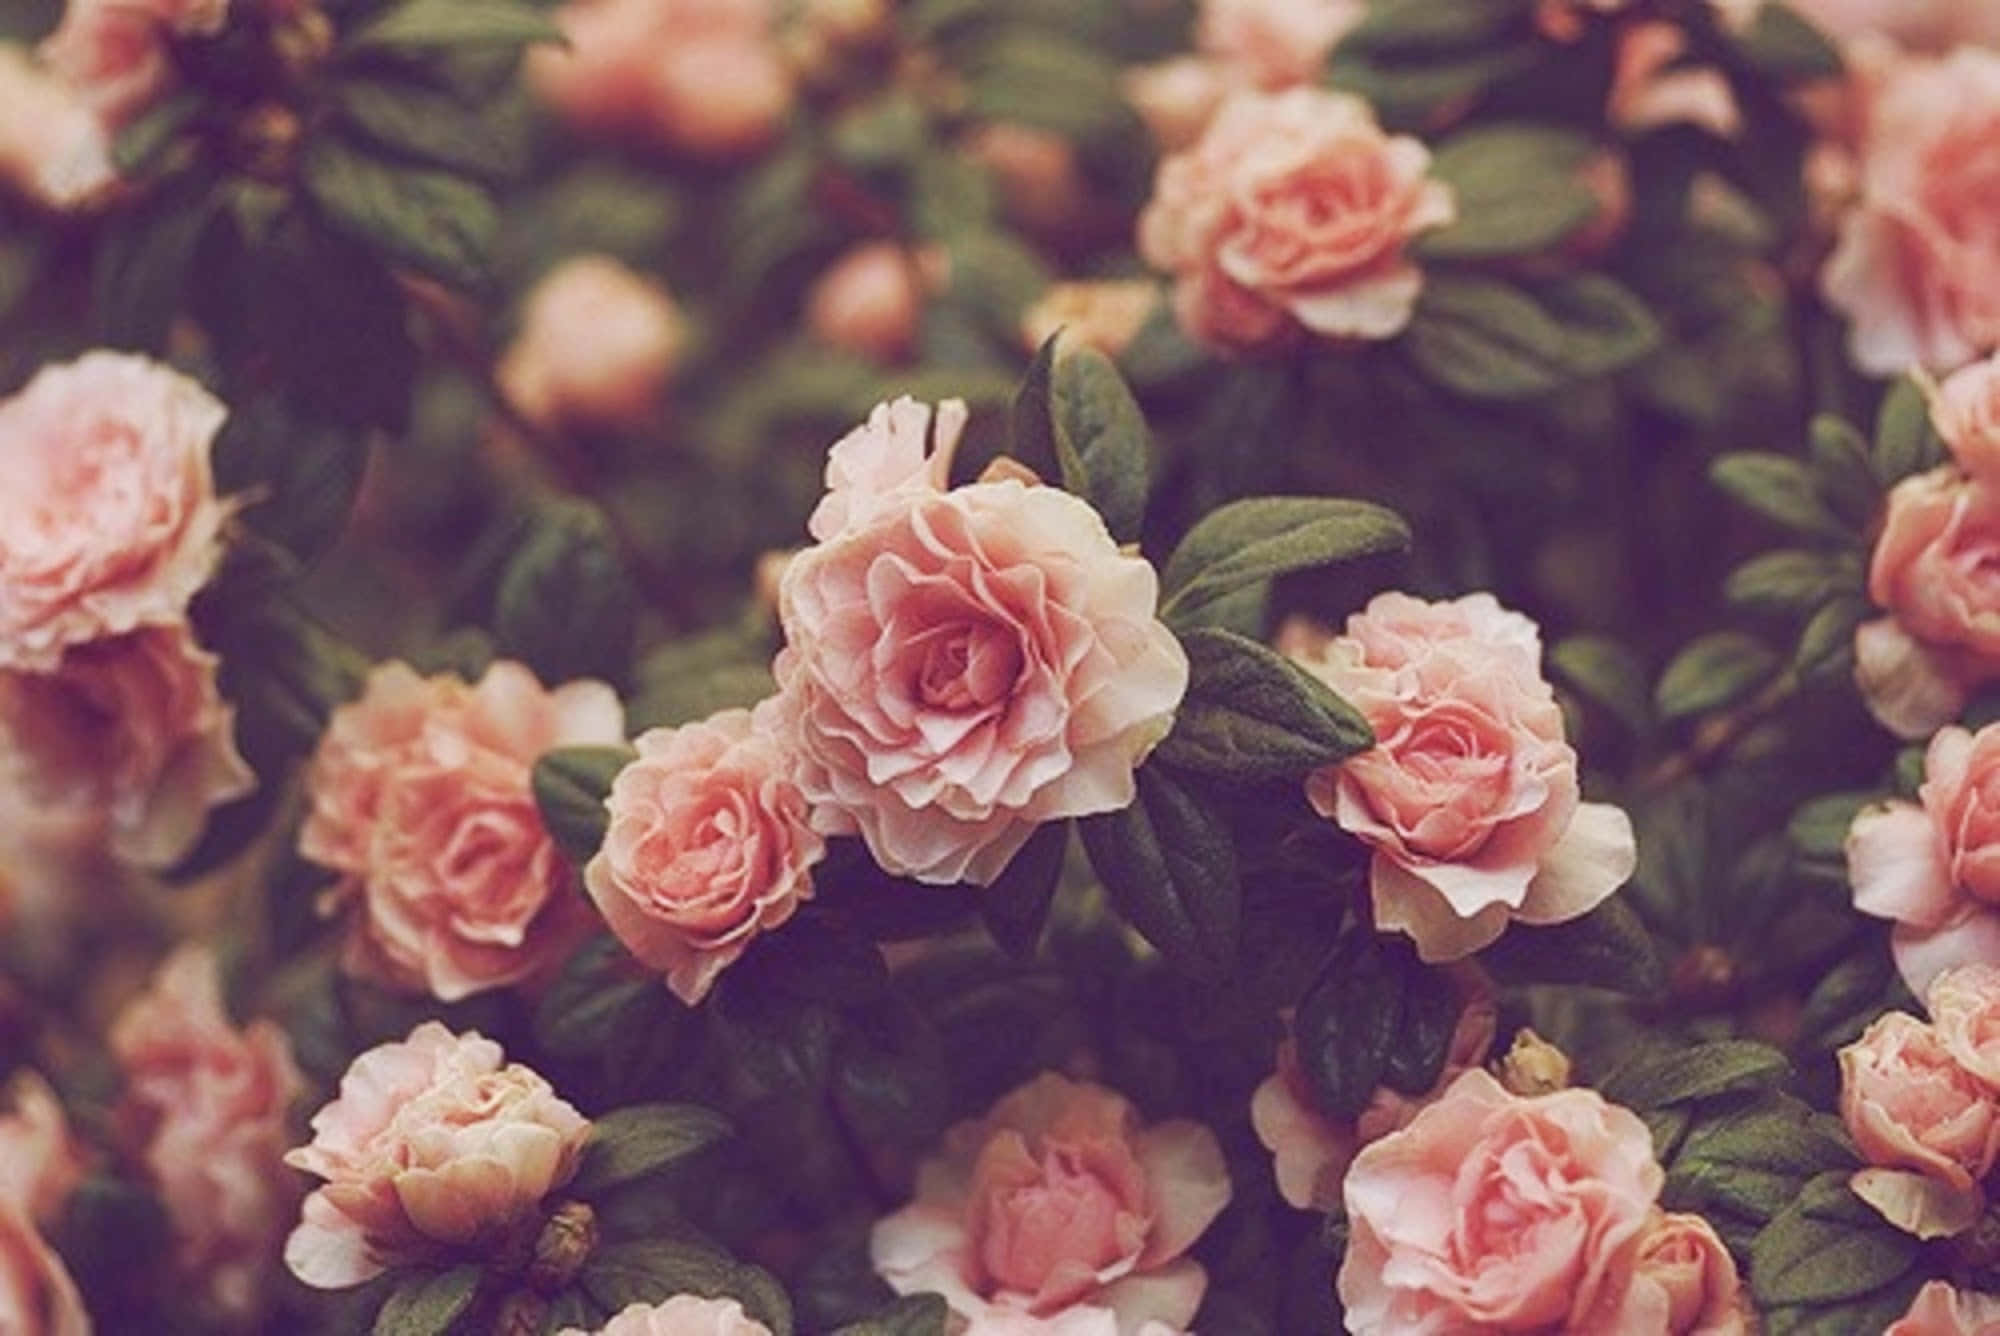 Pink Roses In A Garden With Green Leaves